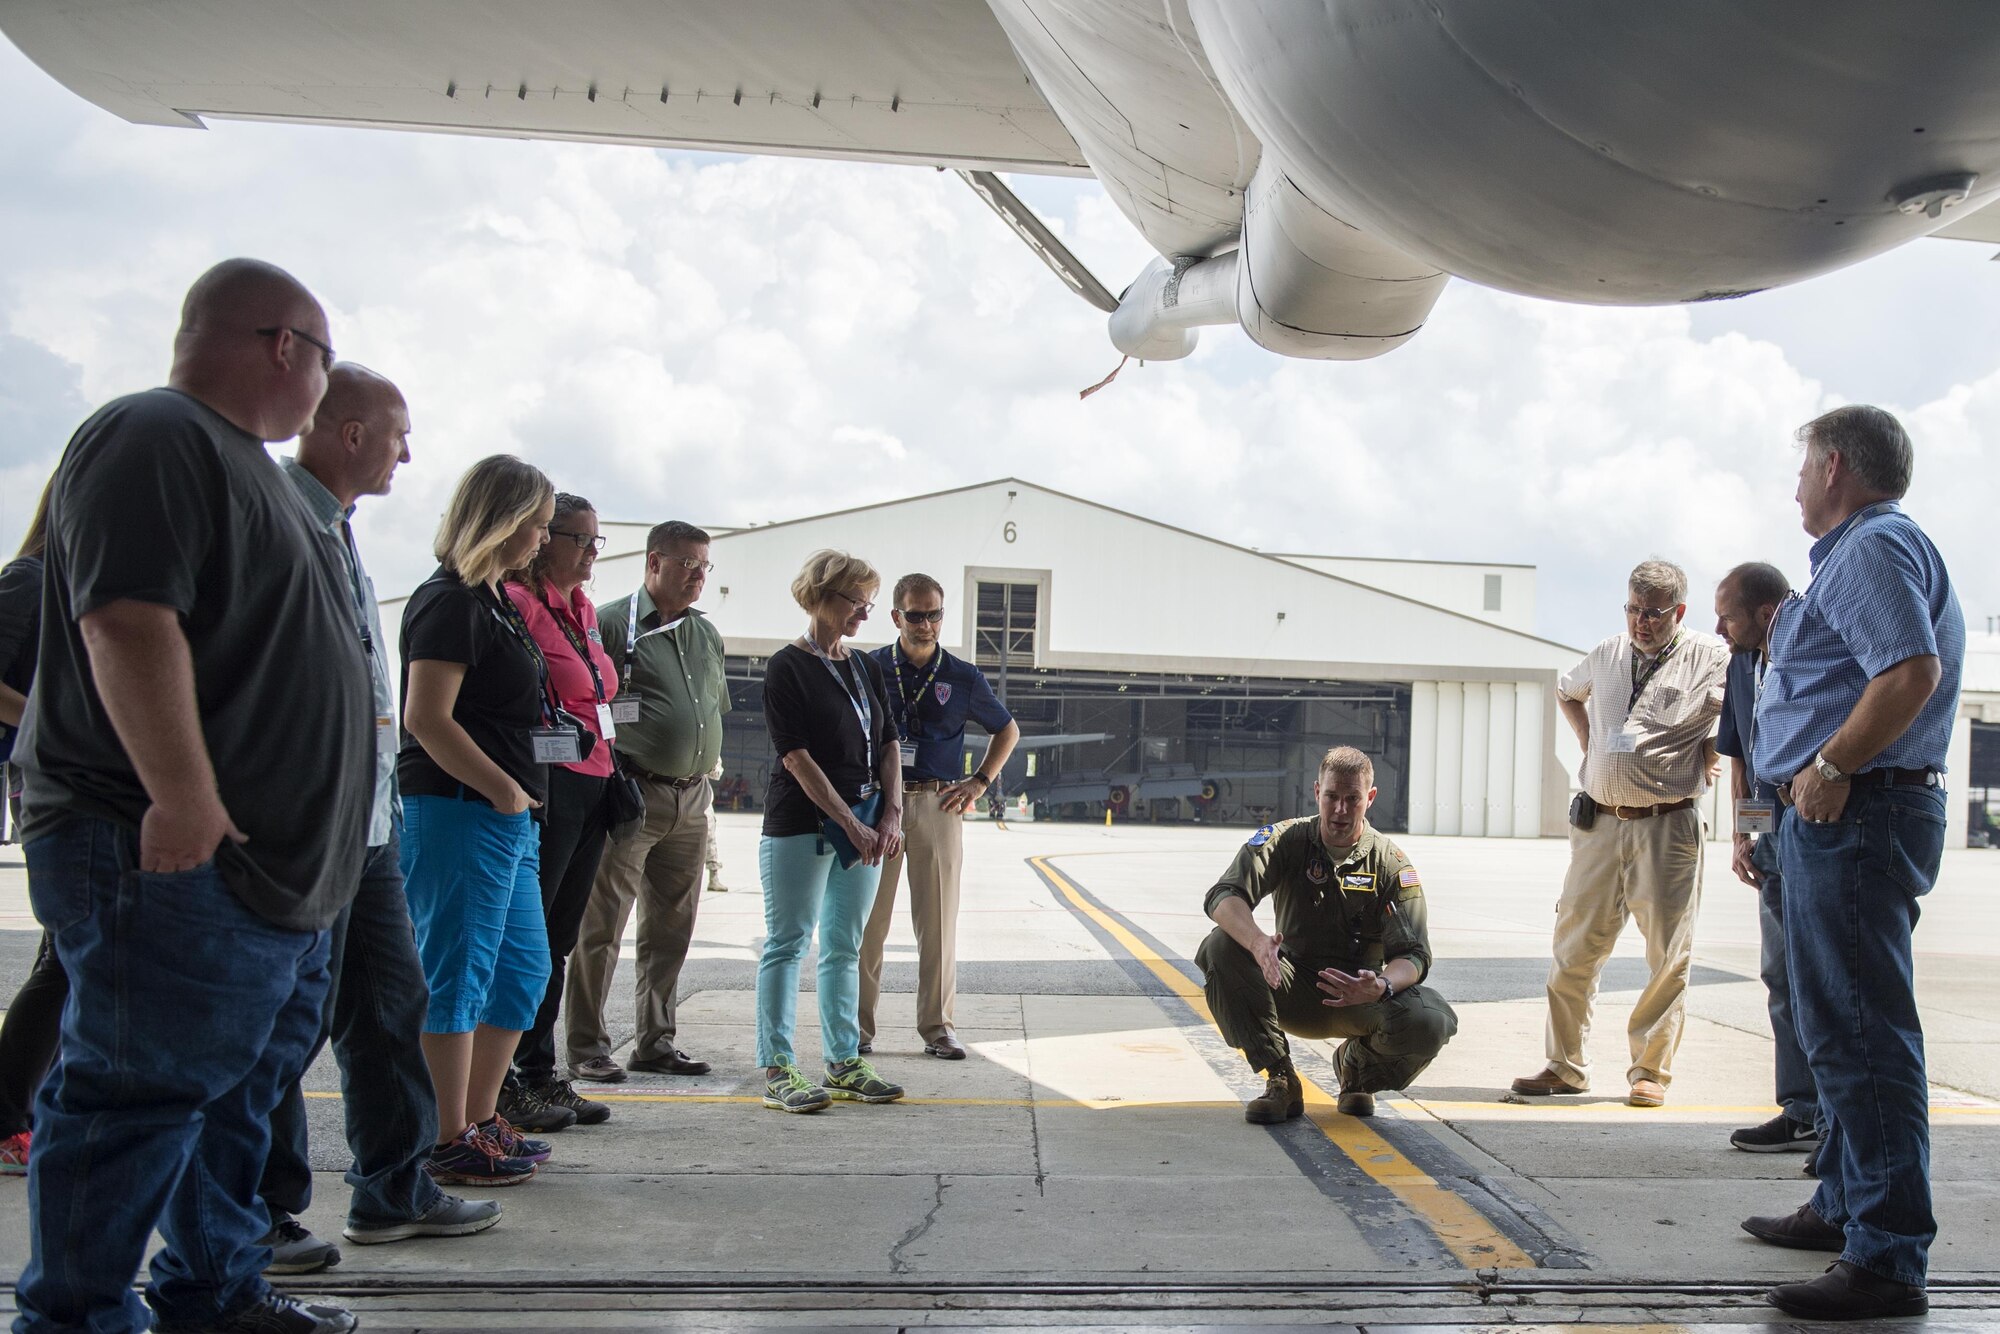 Maj. Micah Jones, 72nd Air Refueling Squadron, KC-135R Stratotanker pilot, speaks to employers of guardsmen and reservists during a tour of a KC-135R static display at Grissom Air Reserve Base, Ind., Aug. 18, 2016. During the tour, Jones explained how the aircraft boom lowers and to provide aerial refueling for a receiver aircraft. (U.S. Air Force photo/Tech. Sgt. Benjamin Mota)